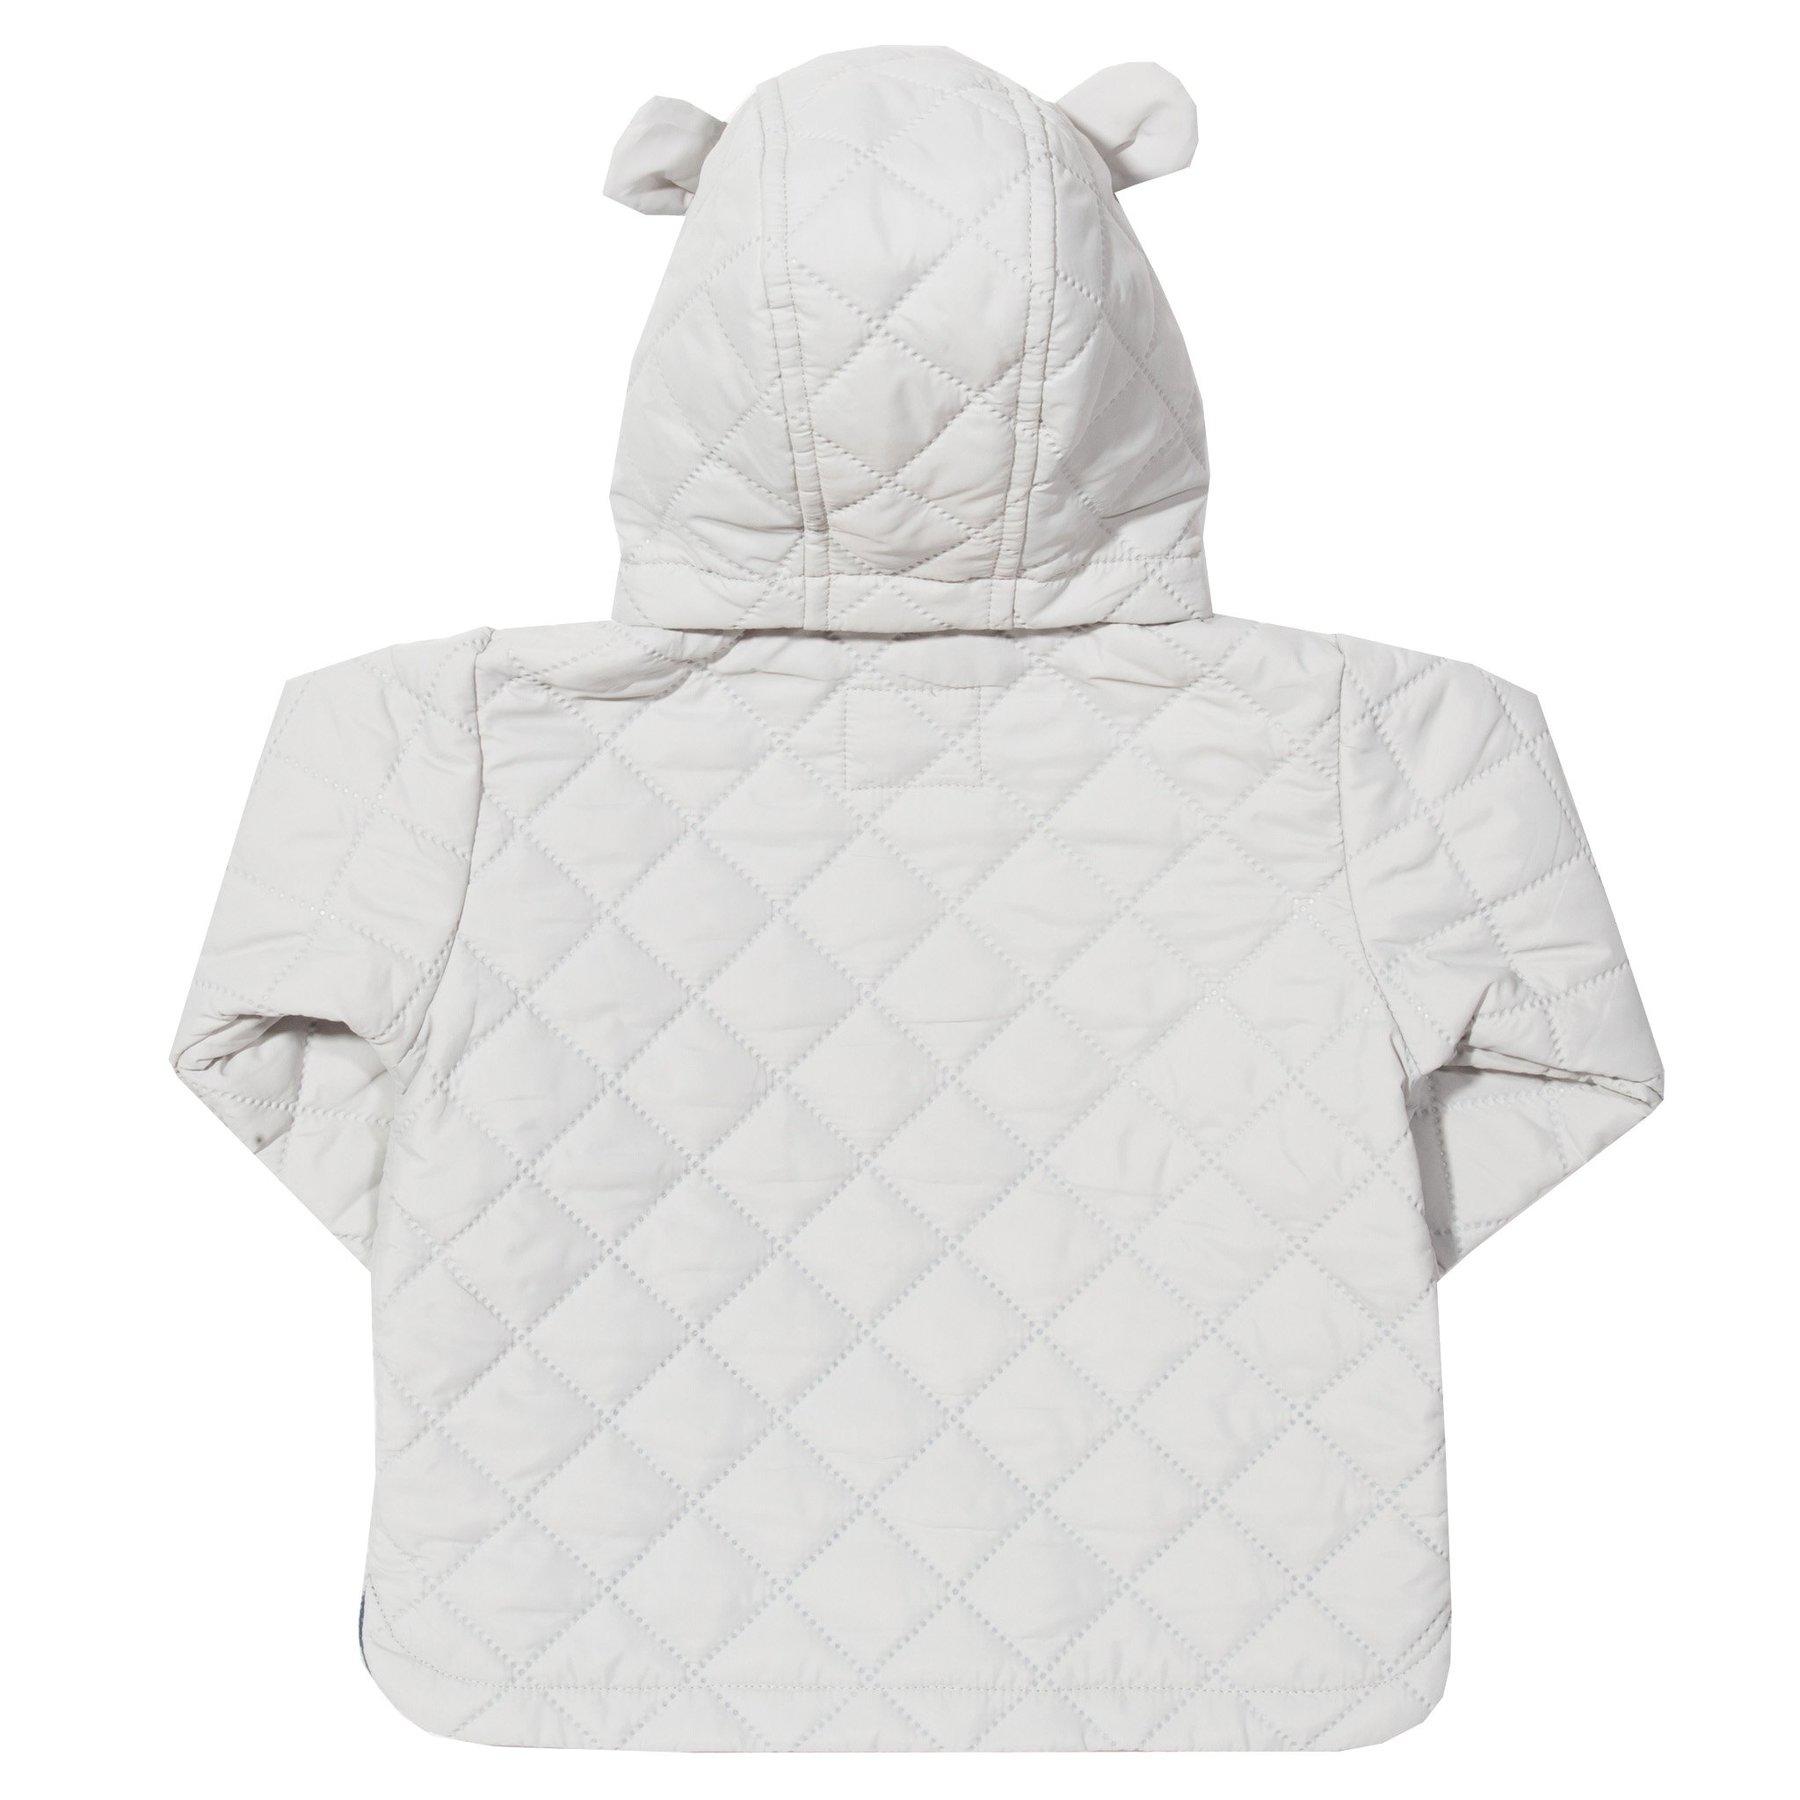 Kite Clothing Mini Country Coat back with hood